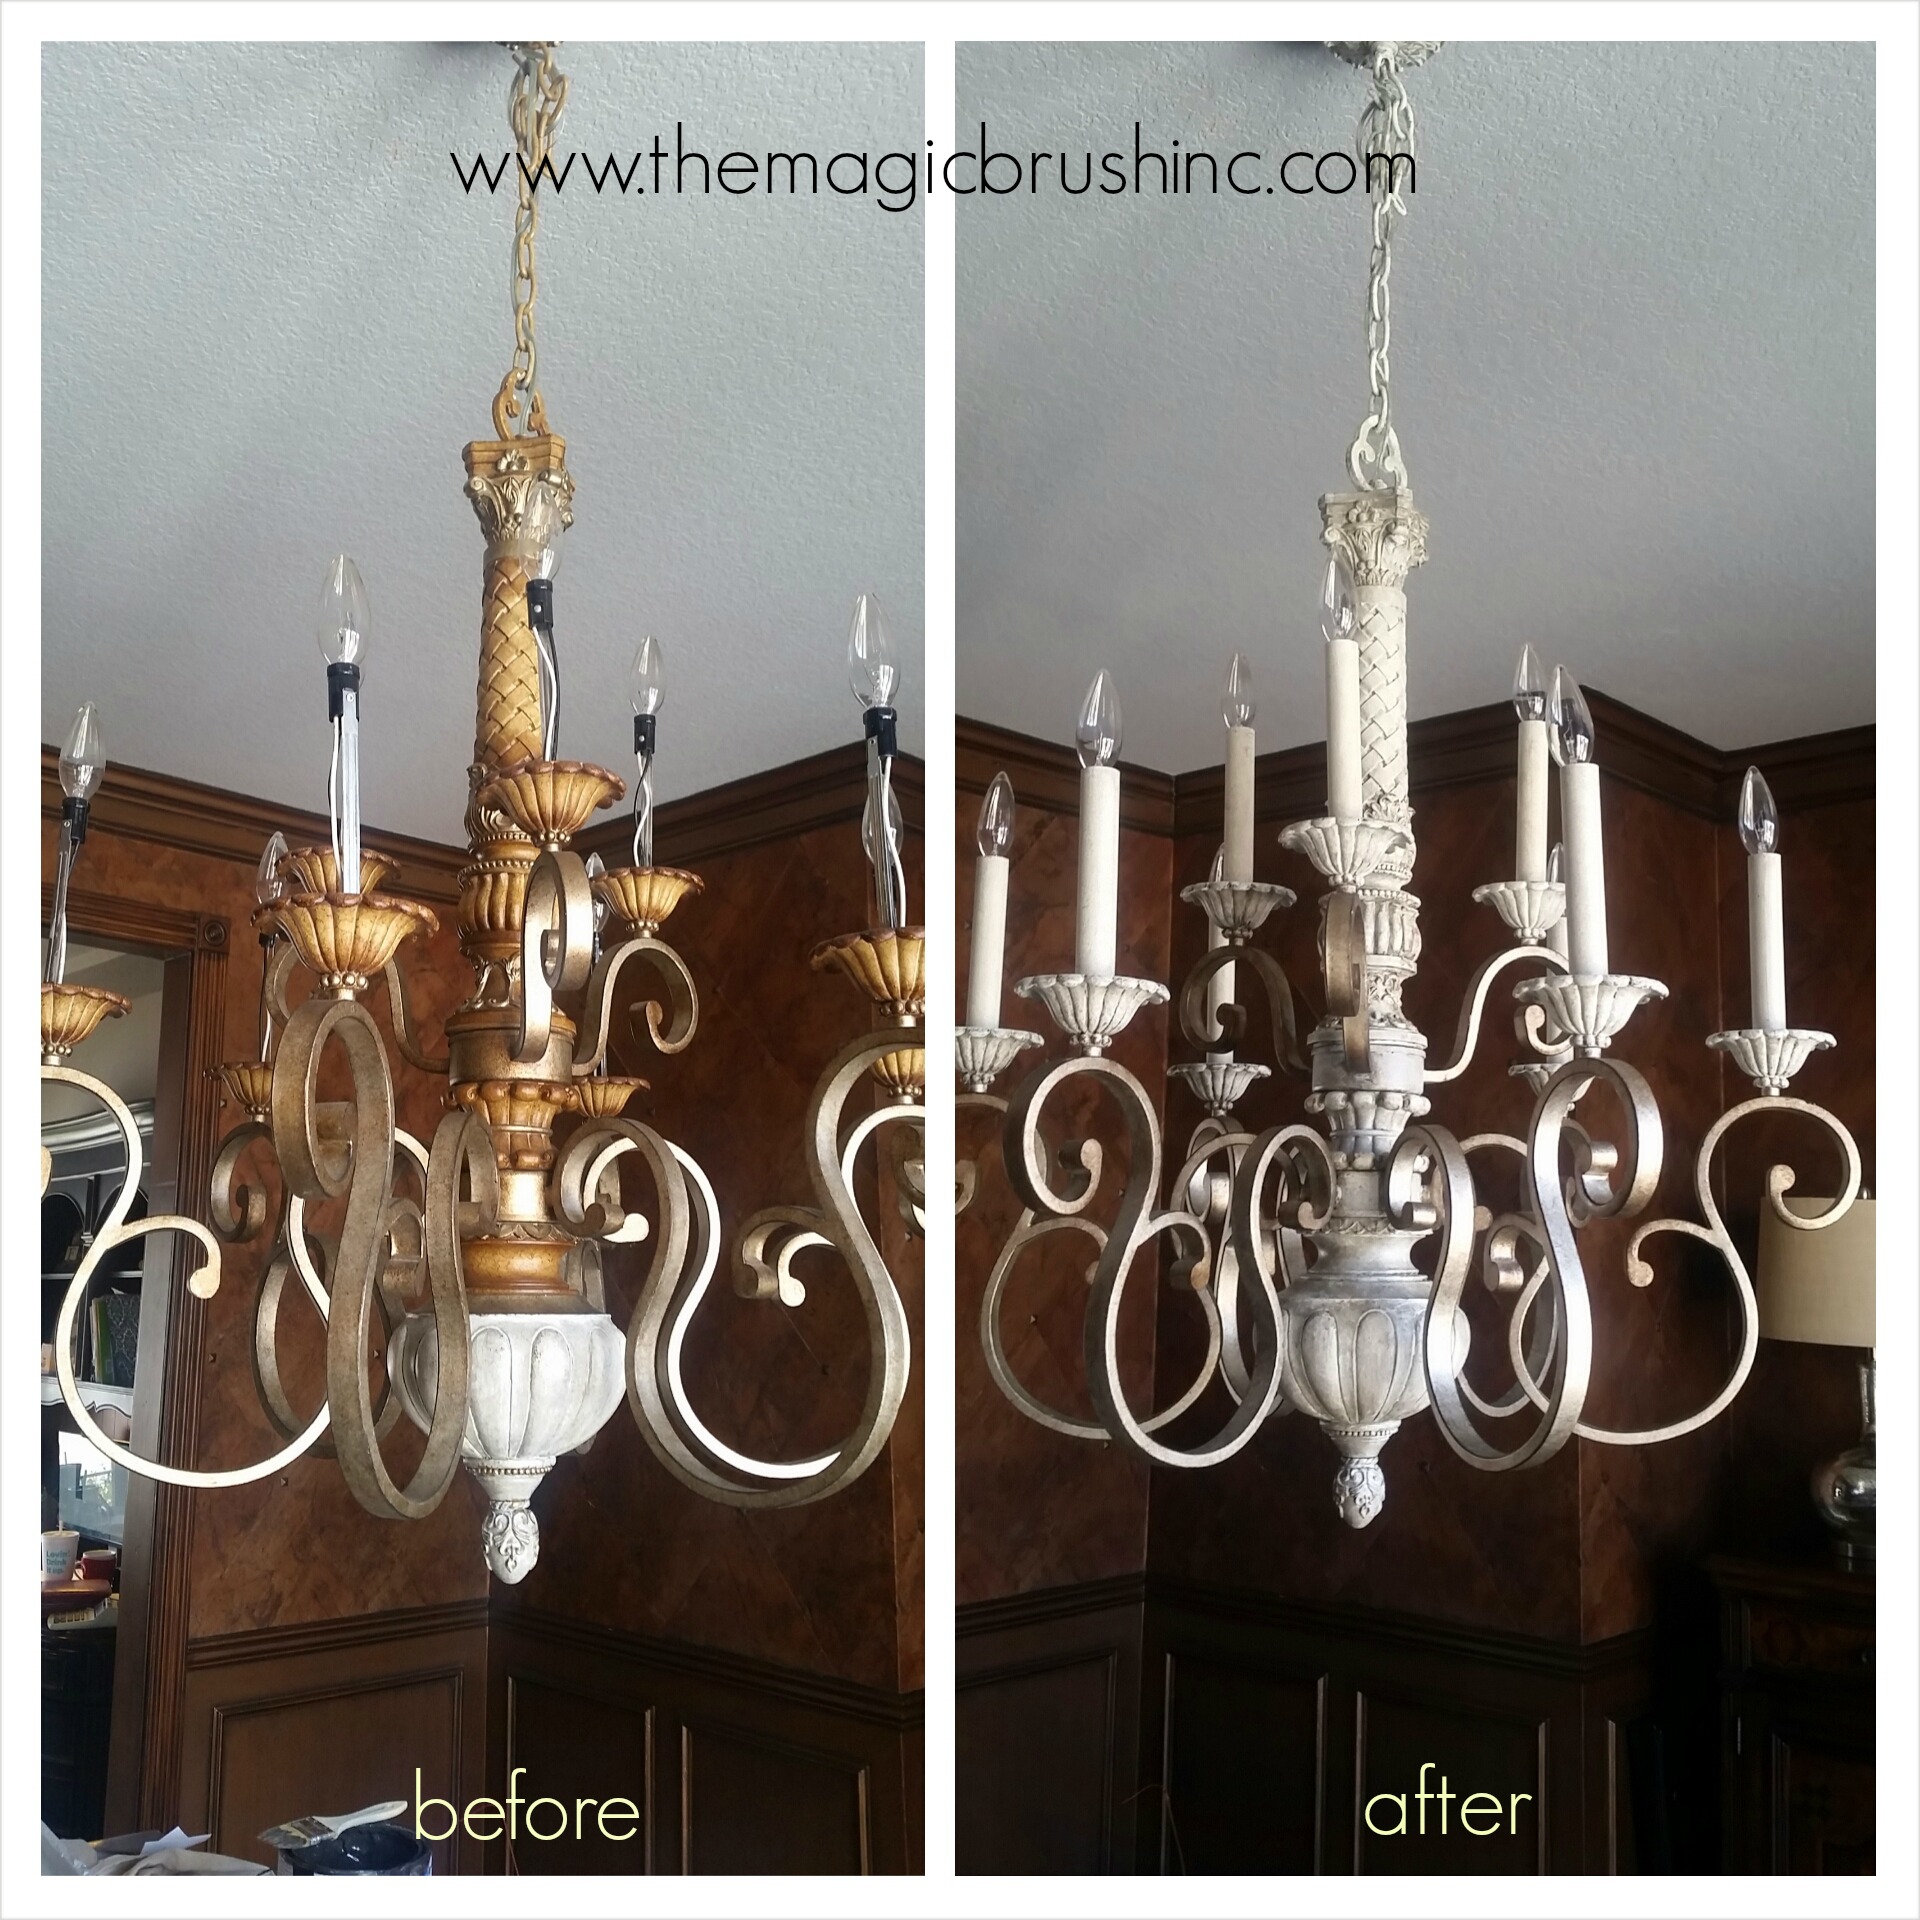 Painting Light Fixtures And Chandeliers, What Kind Of Paint To Use On Chandelier